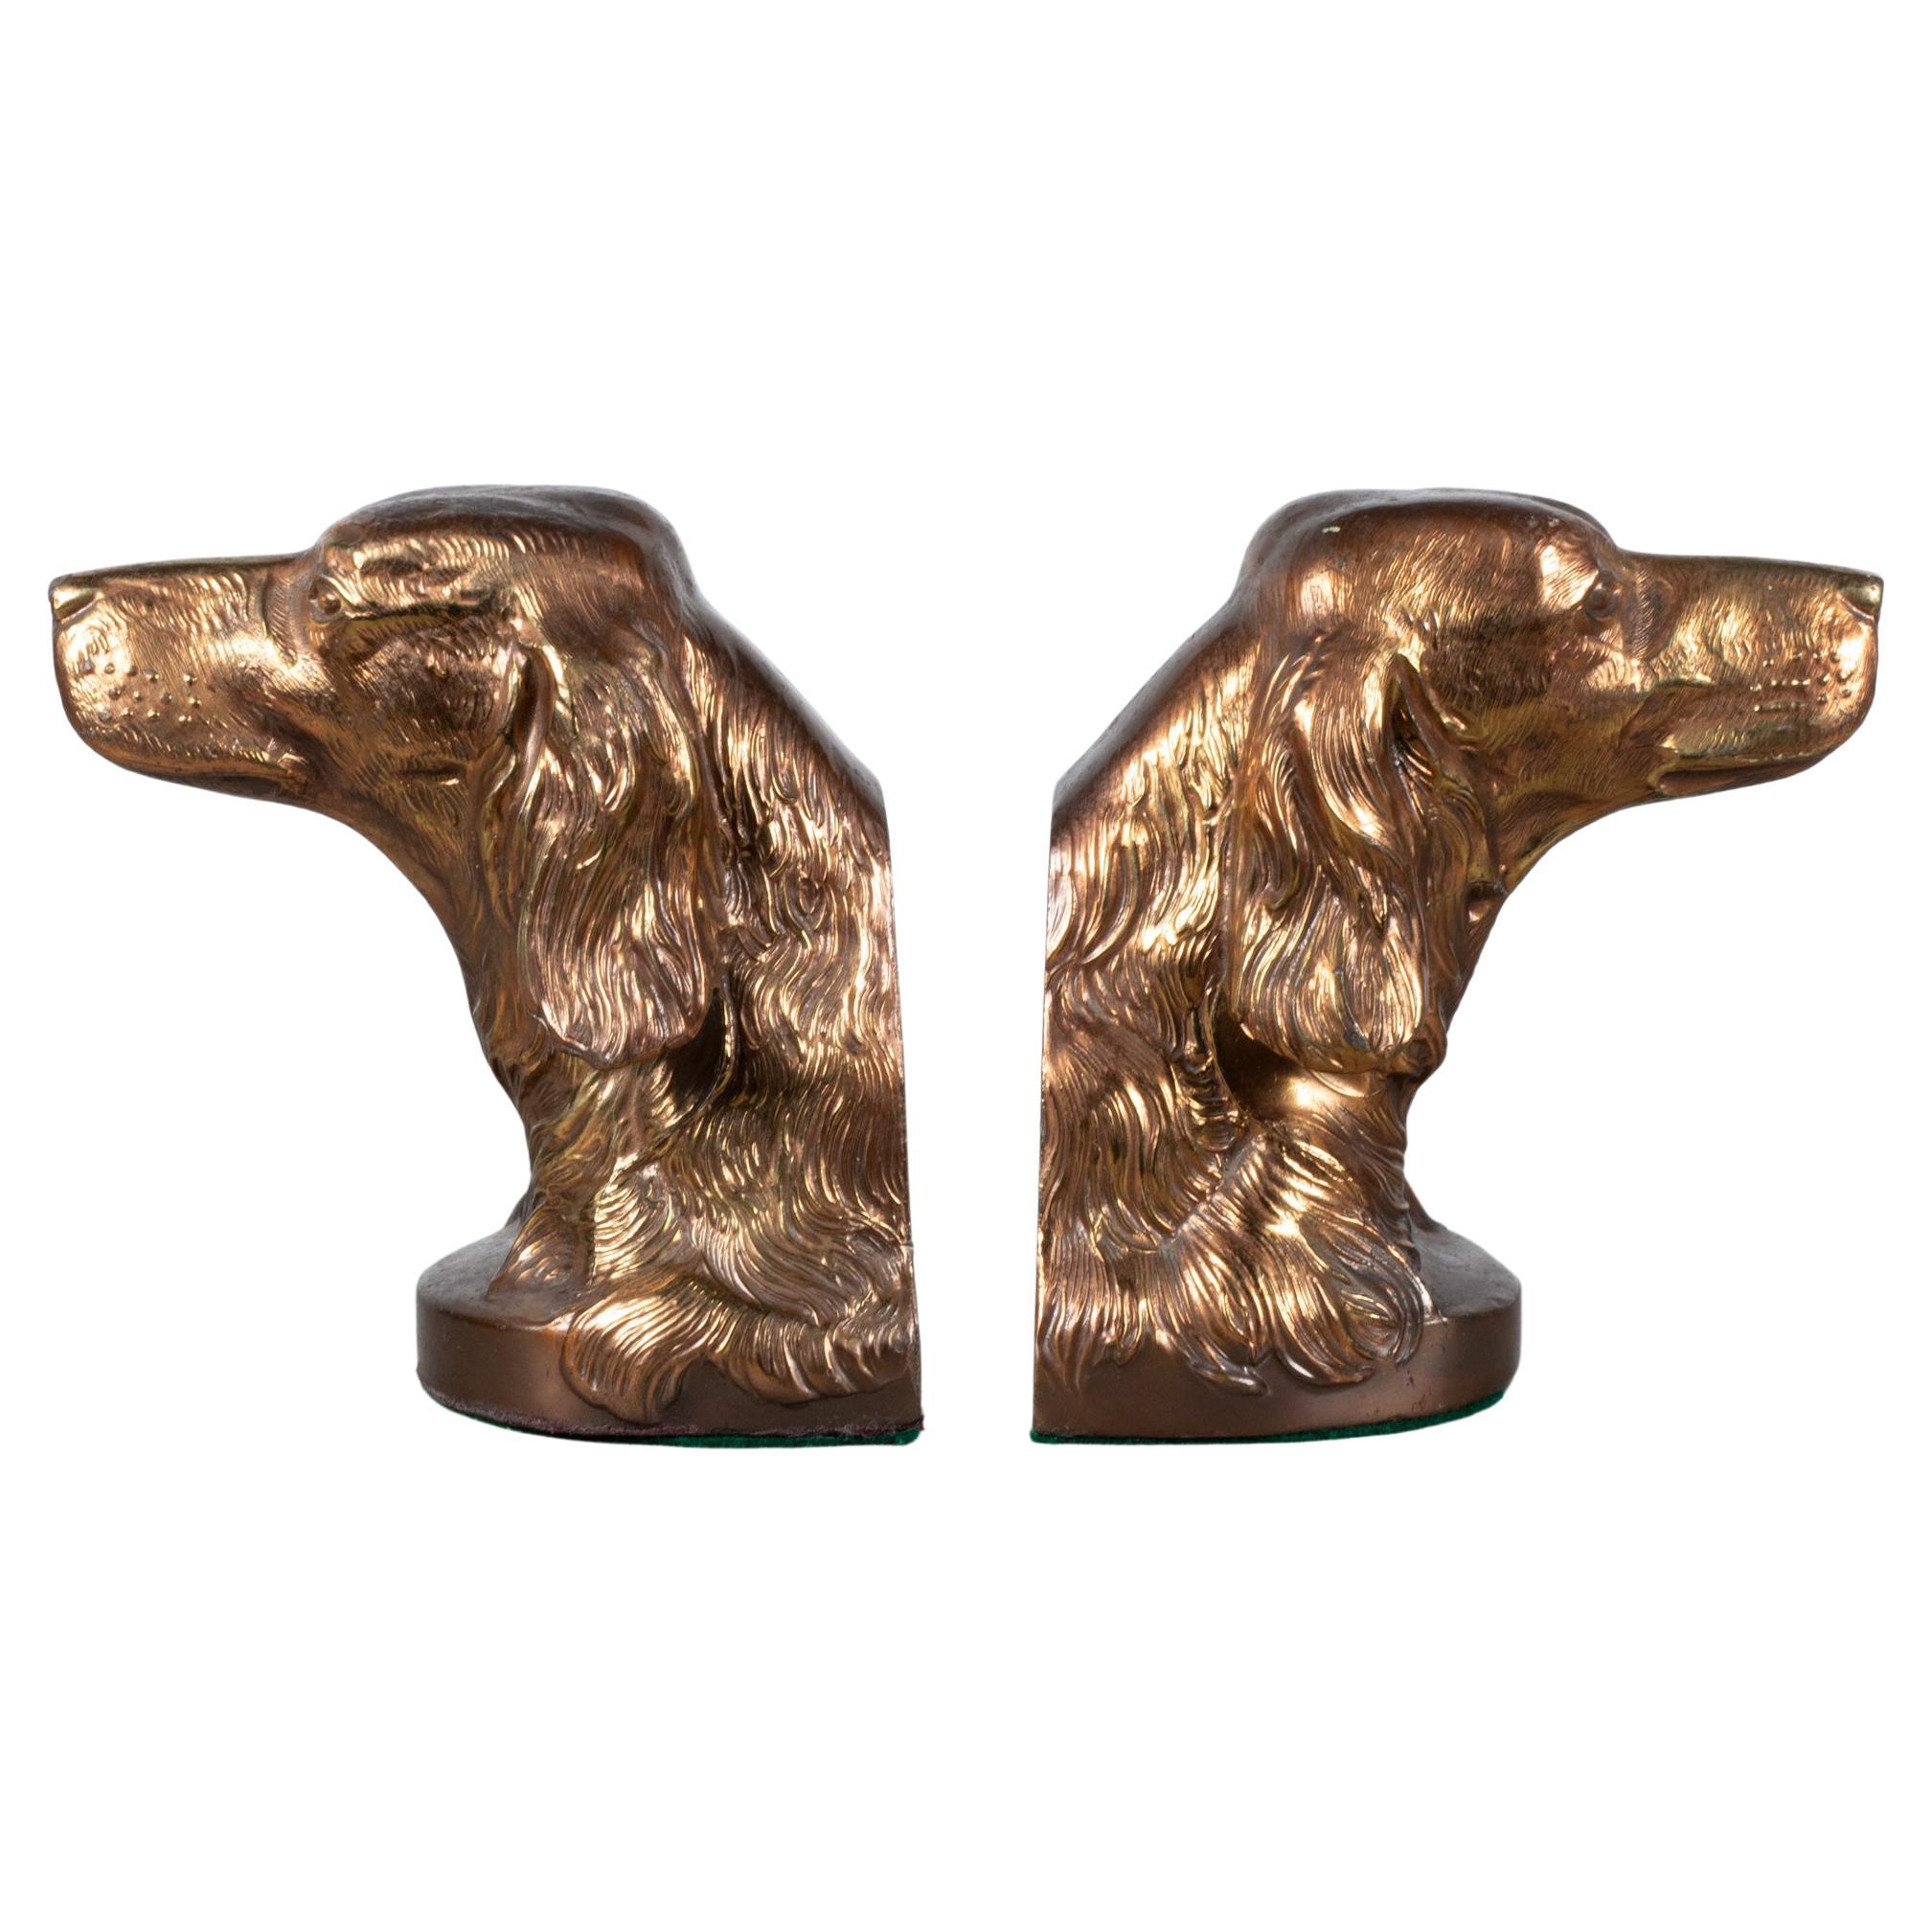 Bronze-Plated Dog Bookends, circa 1940  (FREE SHIPPING)